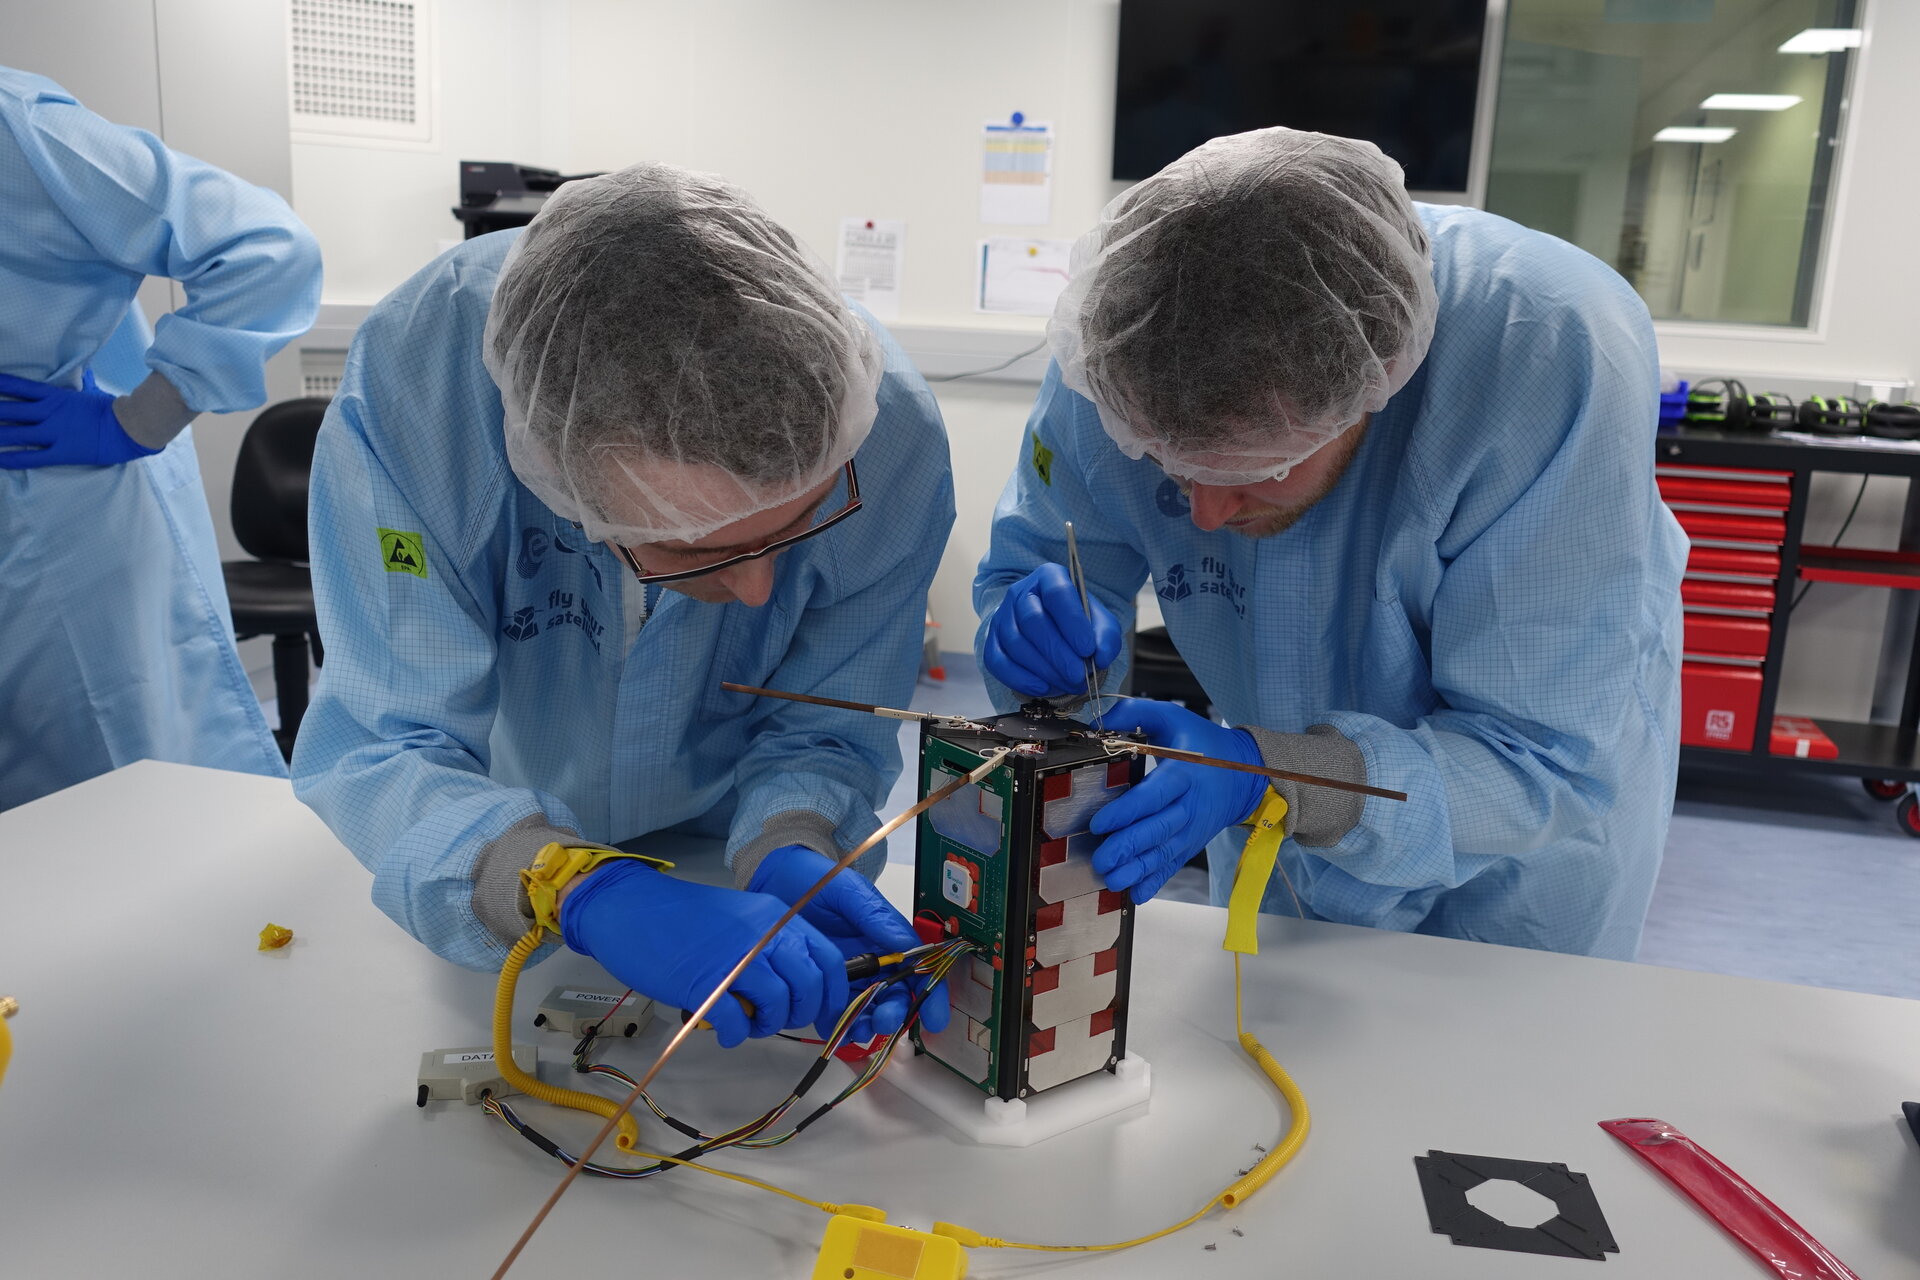 Inspections and checks performed on the EIRSAT-1 CubeSat